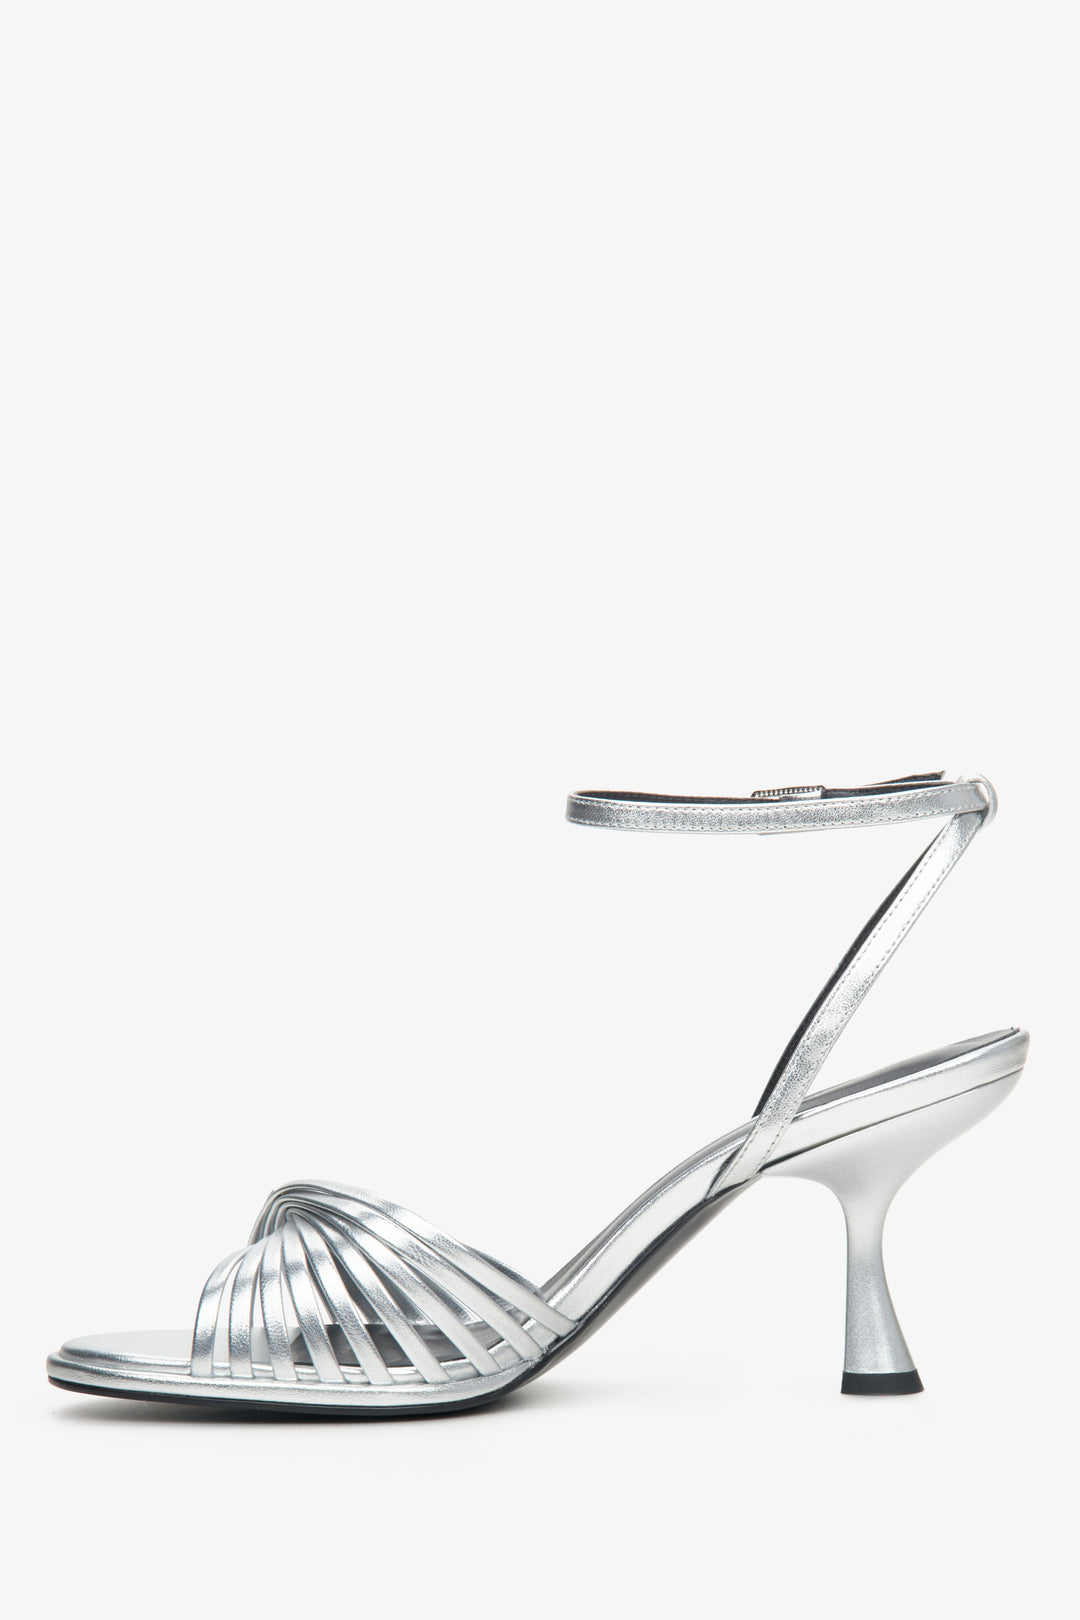 Women's leather sandals with stable silver heels - side profile of the shoe.